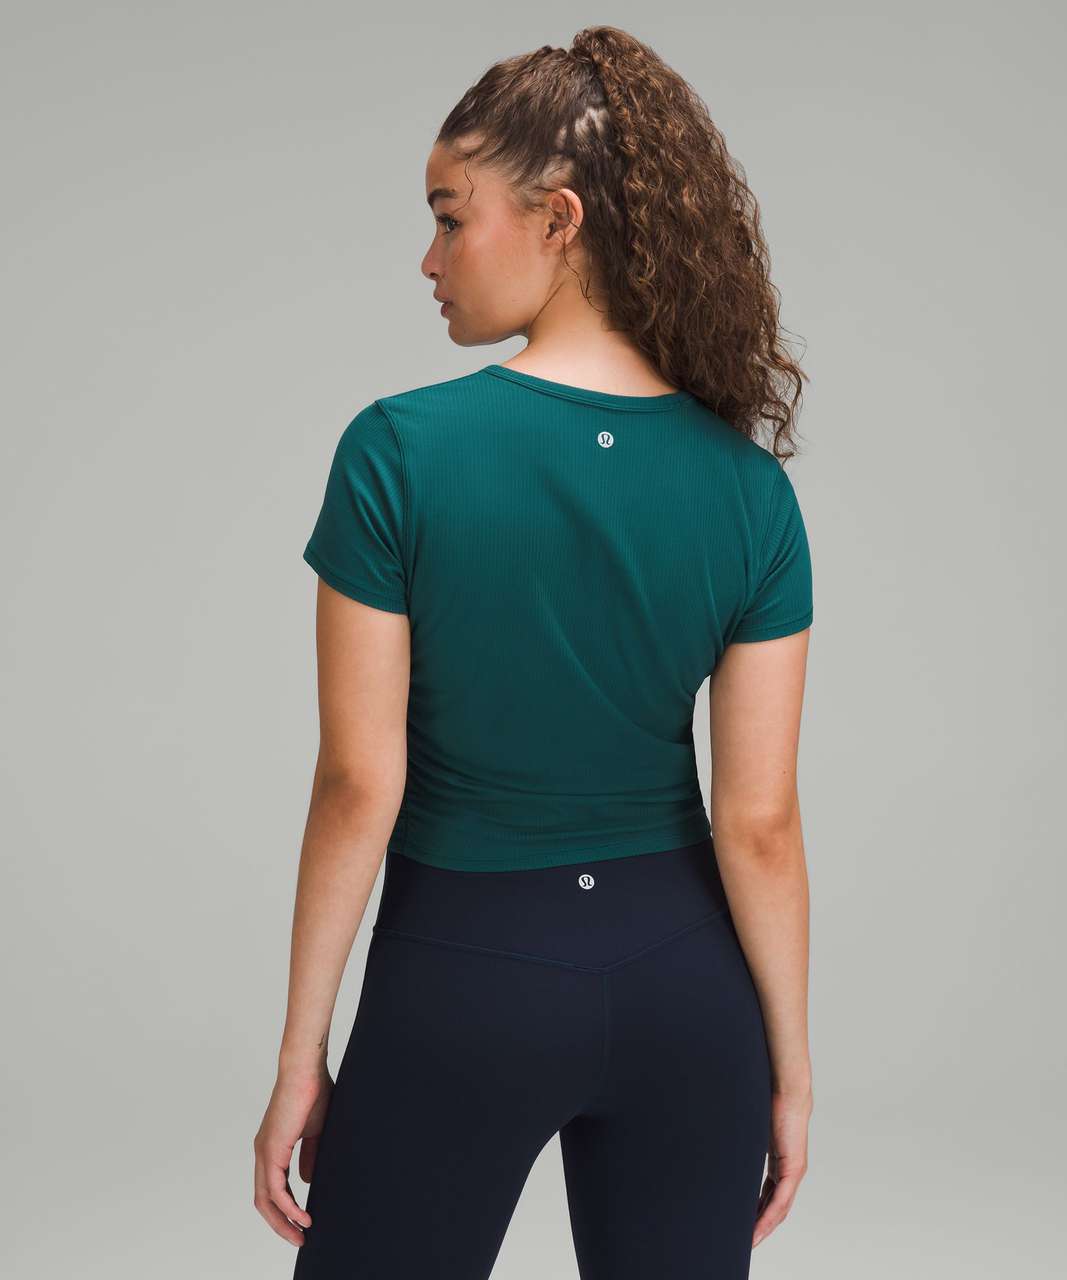 Lululemon All It Takes Ribbed Nulu T-Shirt - Storm Teal